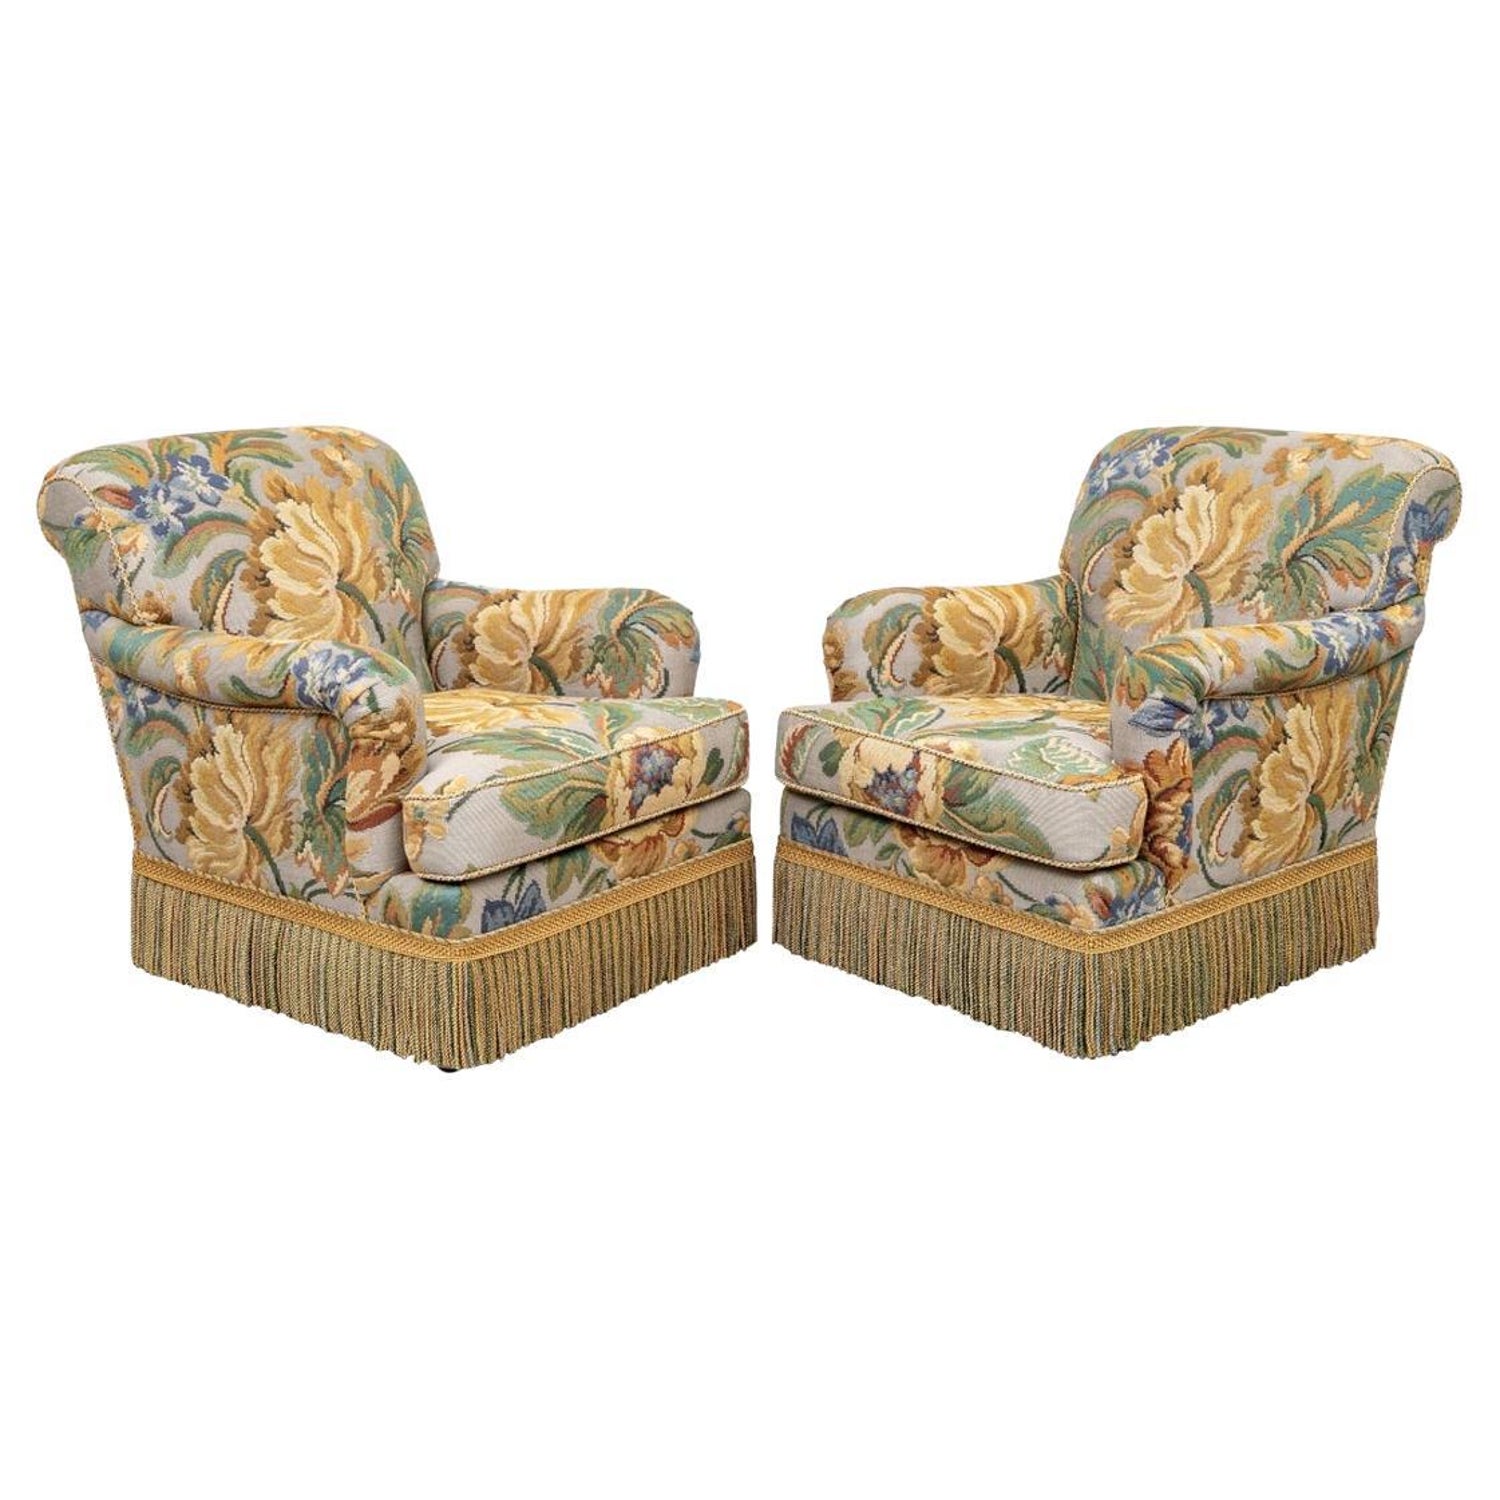 Pair of Custom Upholstered Club Chairs by Edward Ferrell For Sale at 1stDibs